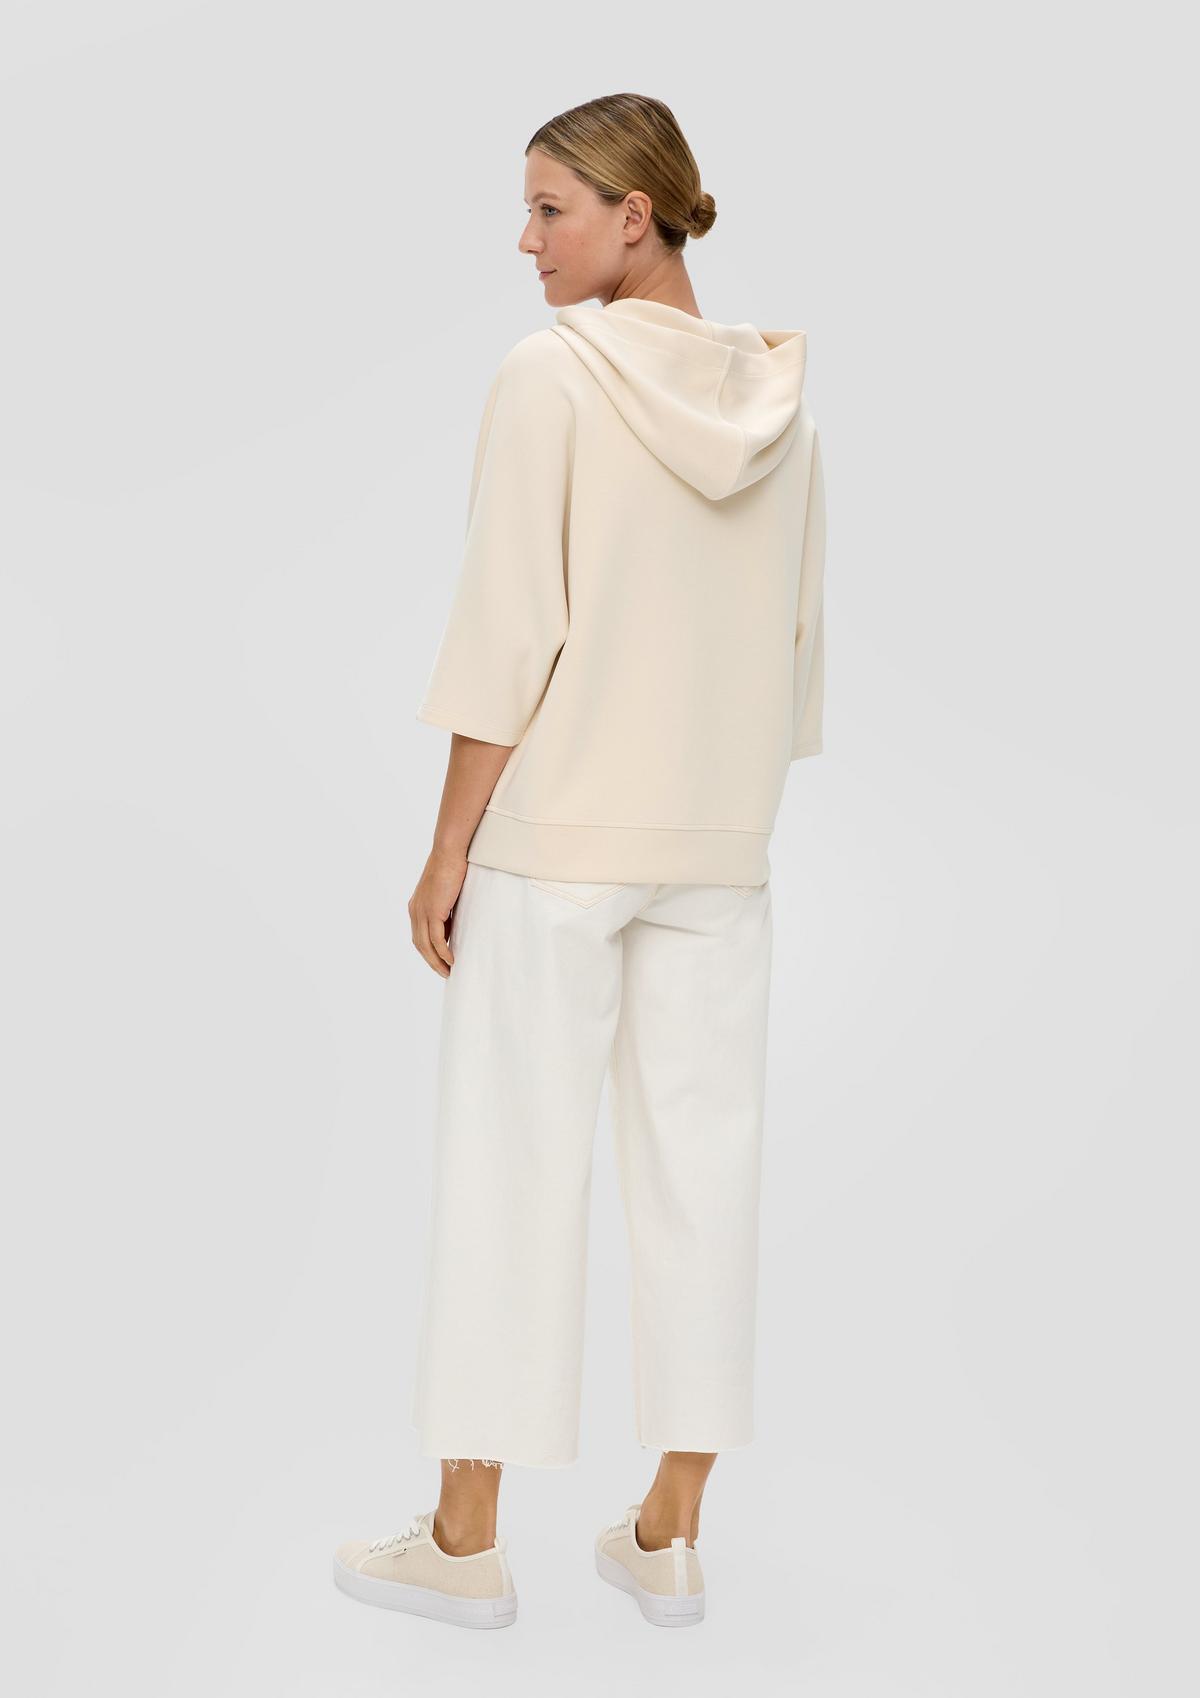 s.Oliver Scuba sweatshirt with batwing sleeves